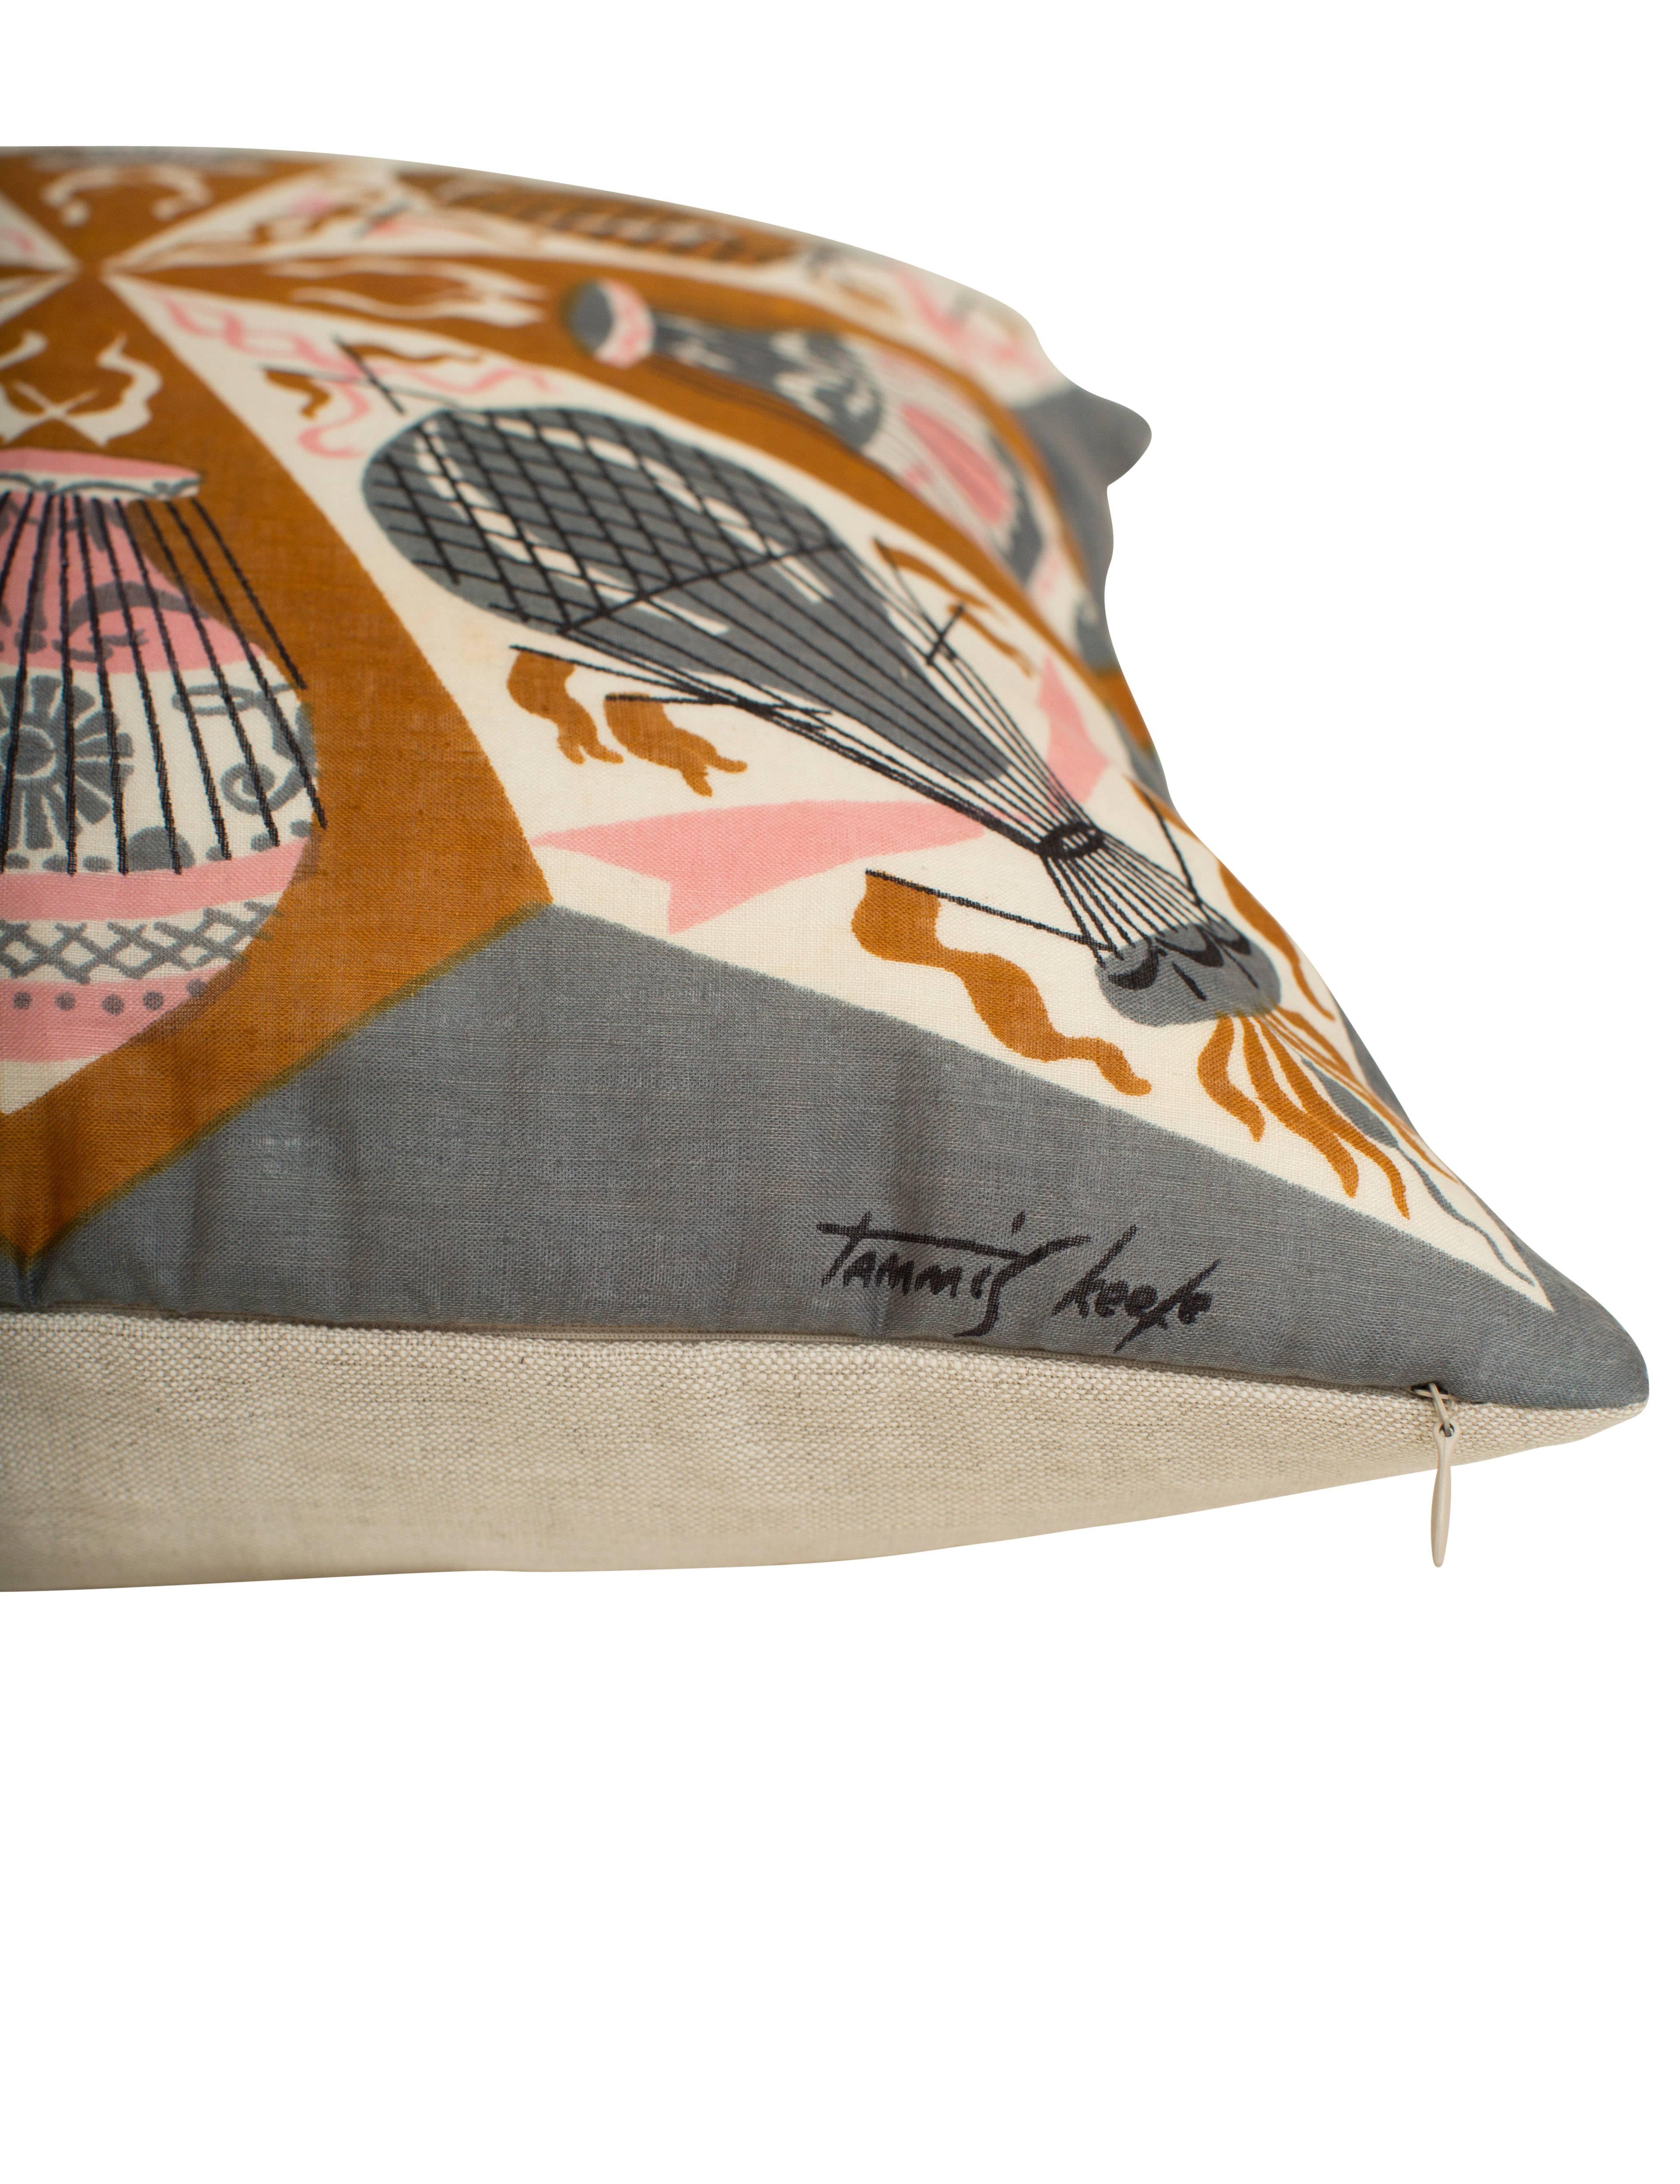 Custom-made one-of-a-kind luxury cushion (pillow) created from an exquisite late 1940s vintage Tammis Keefe scarf in a charming stylised pattern. In an assortment of grey, brown and pink muted colours, scarves from this era were known for their soft